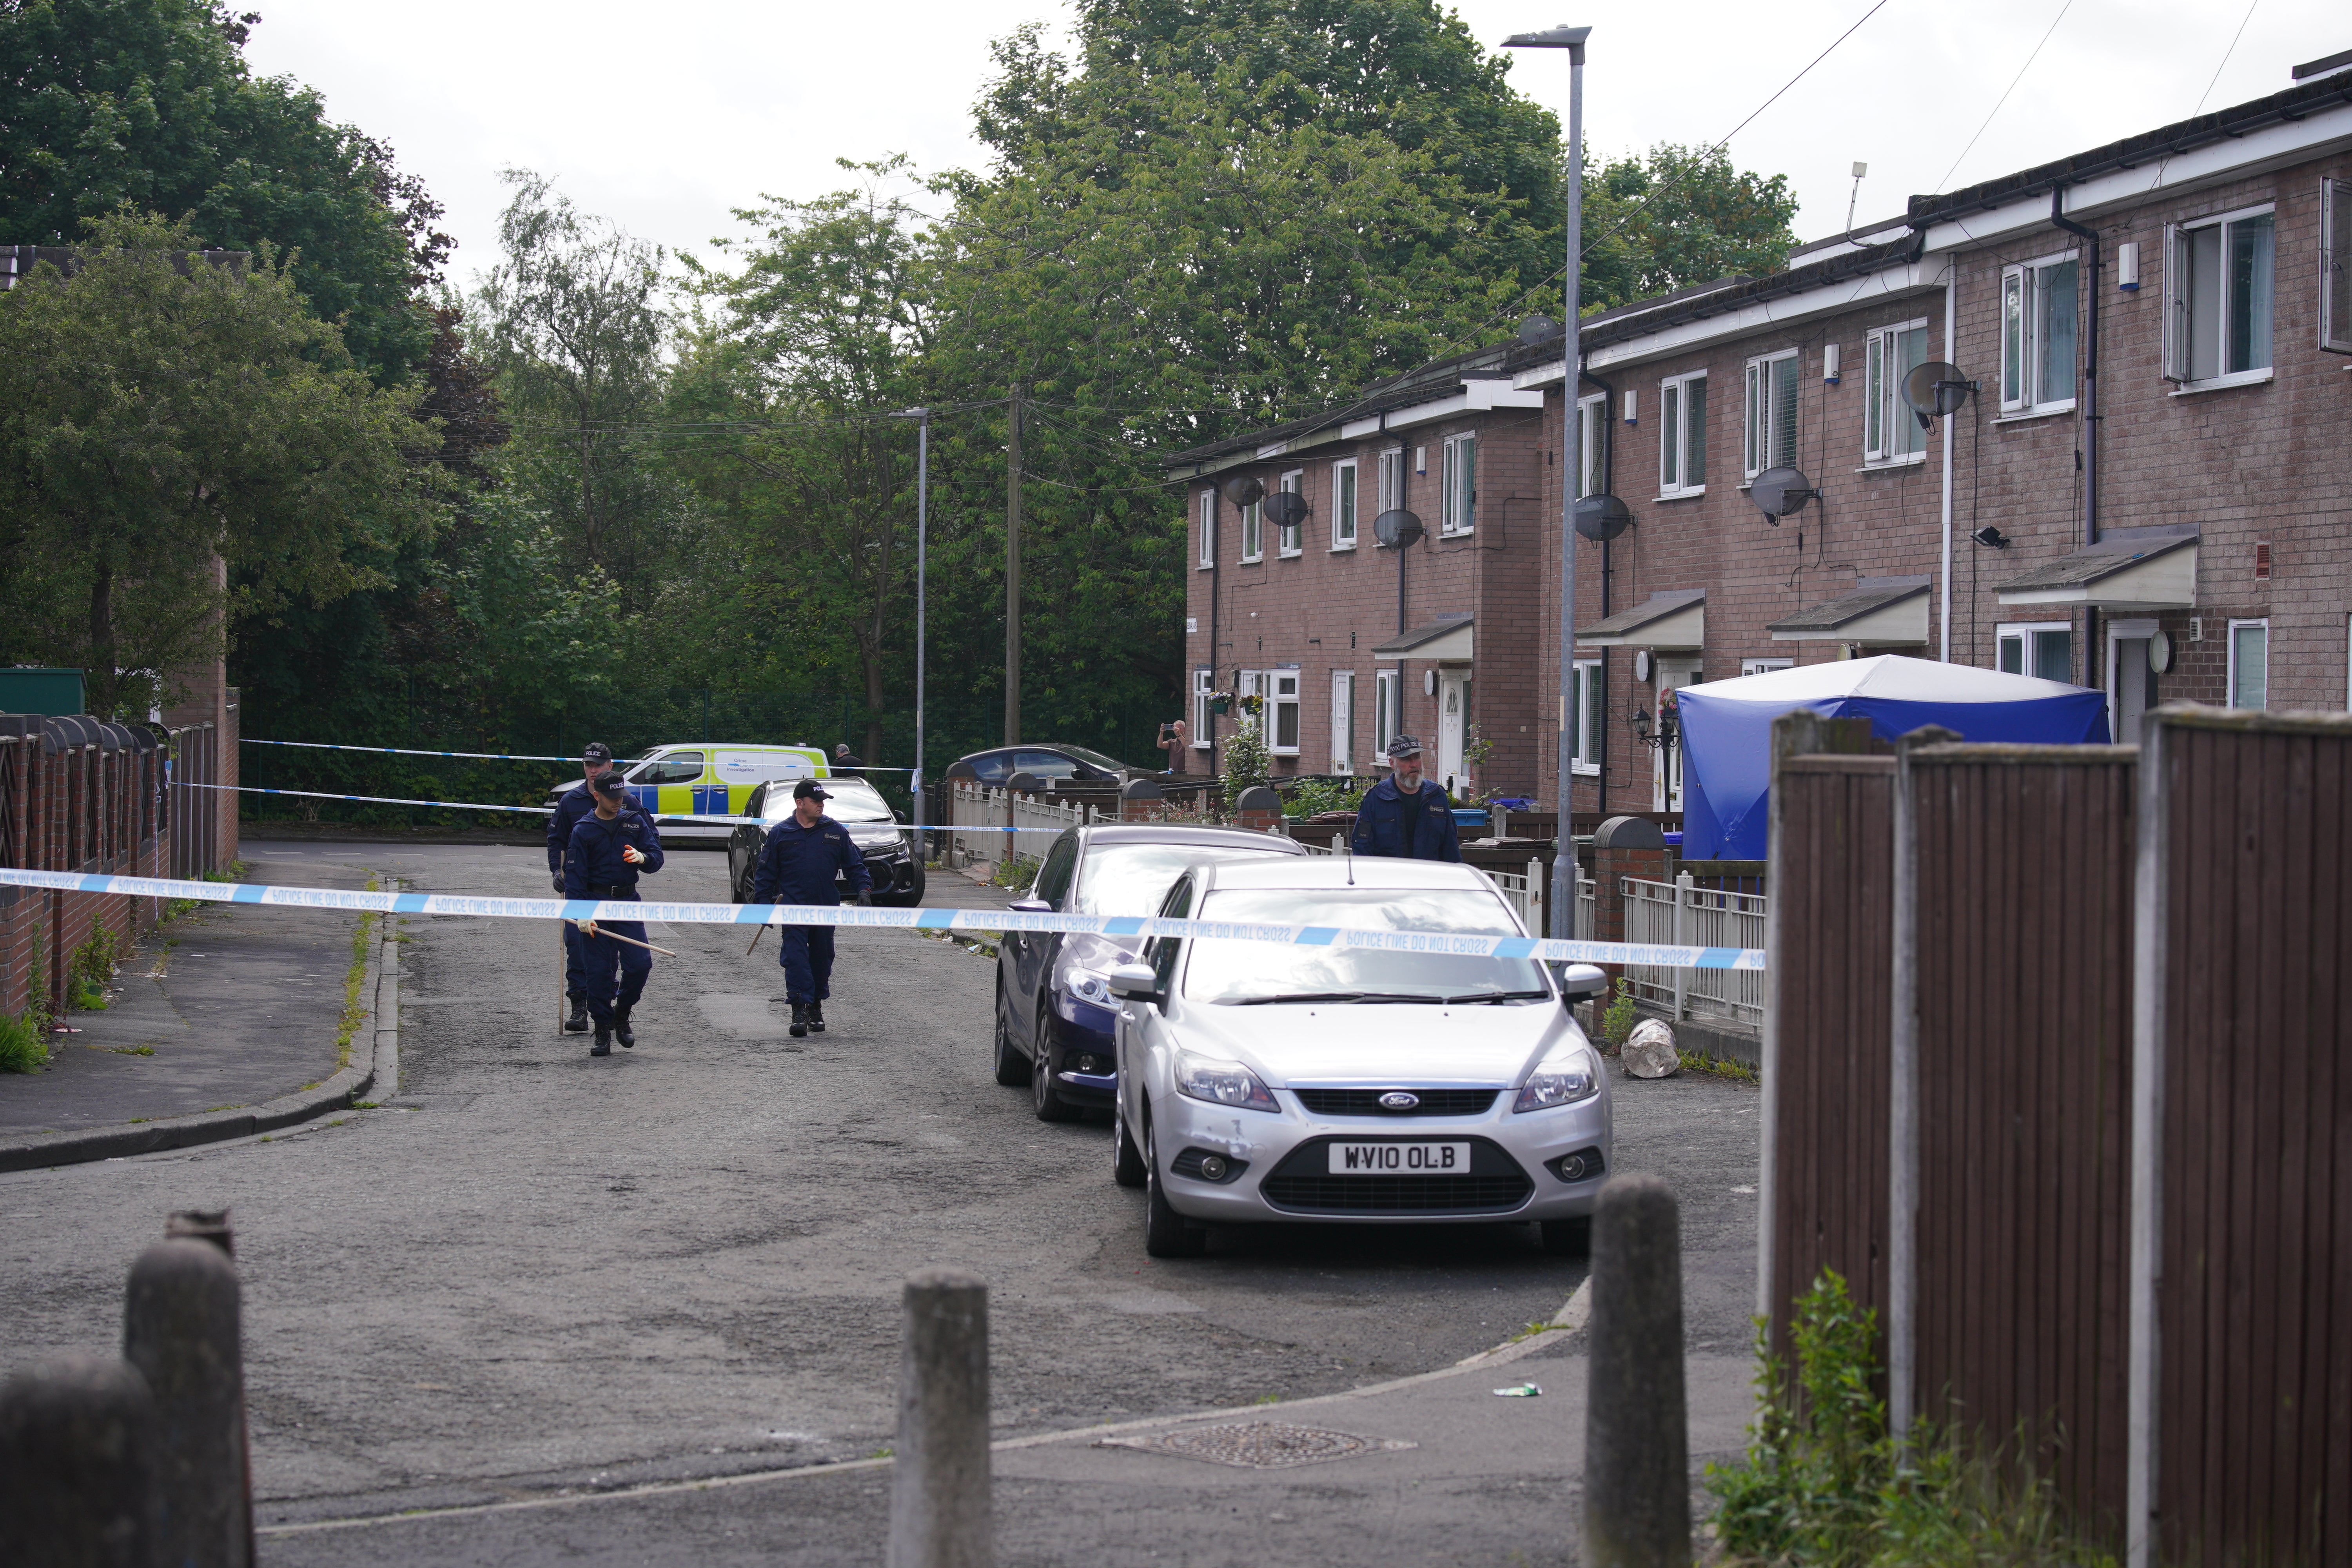 Police officers at the scene in Bednal Avenue, Miles Platting, Manchester, following the incident (Peter Byrne/PA)